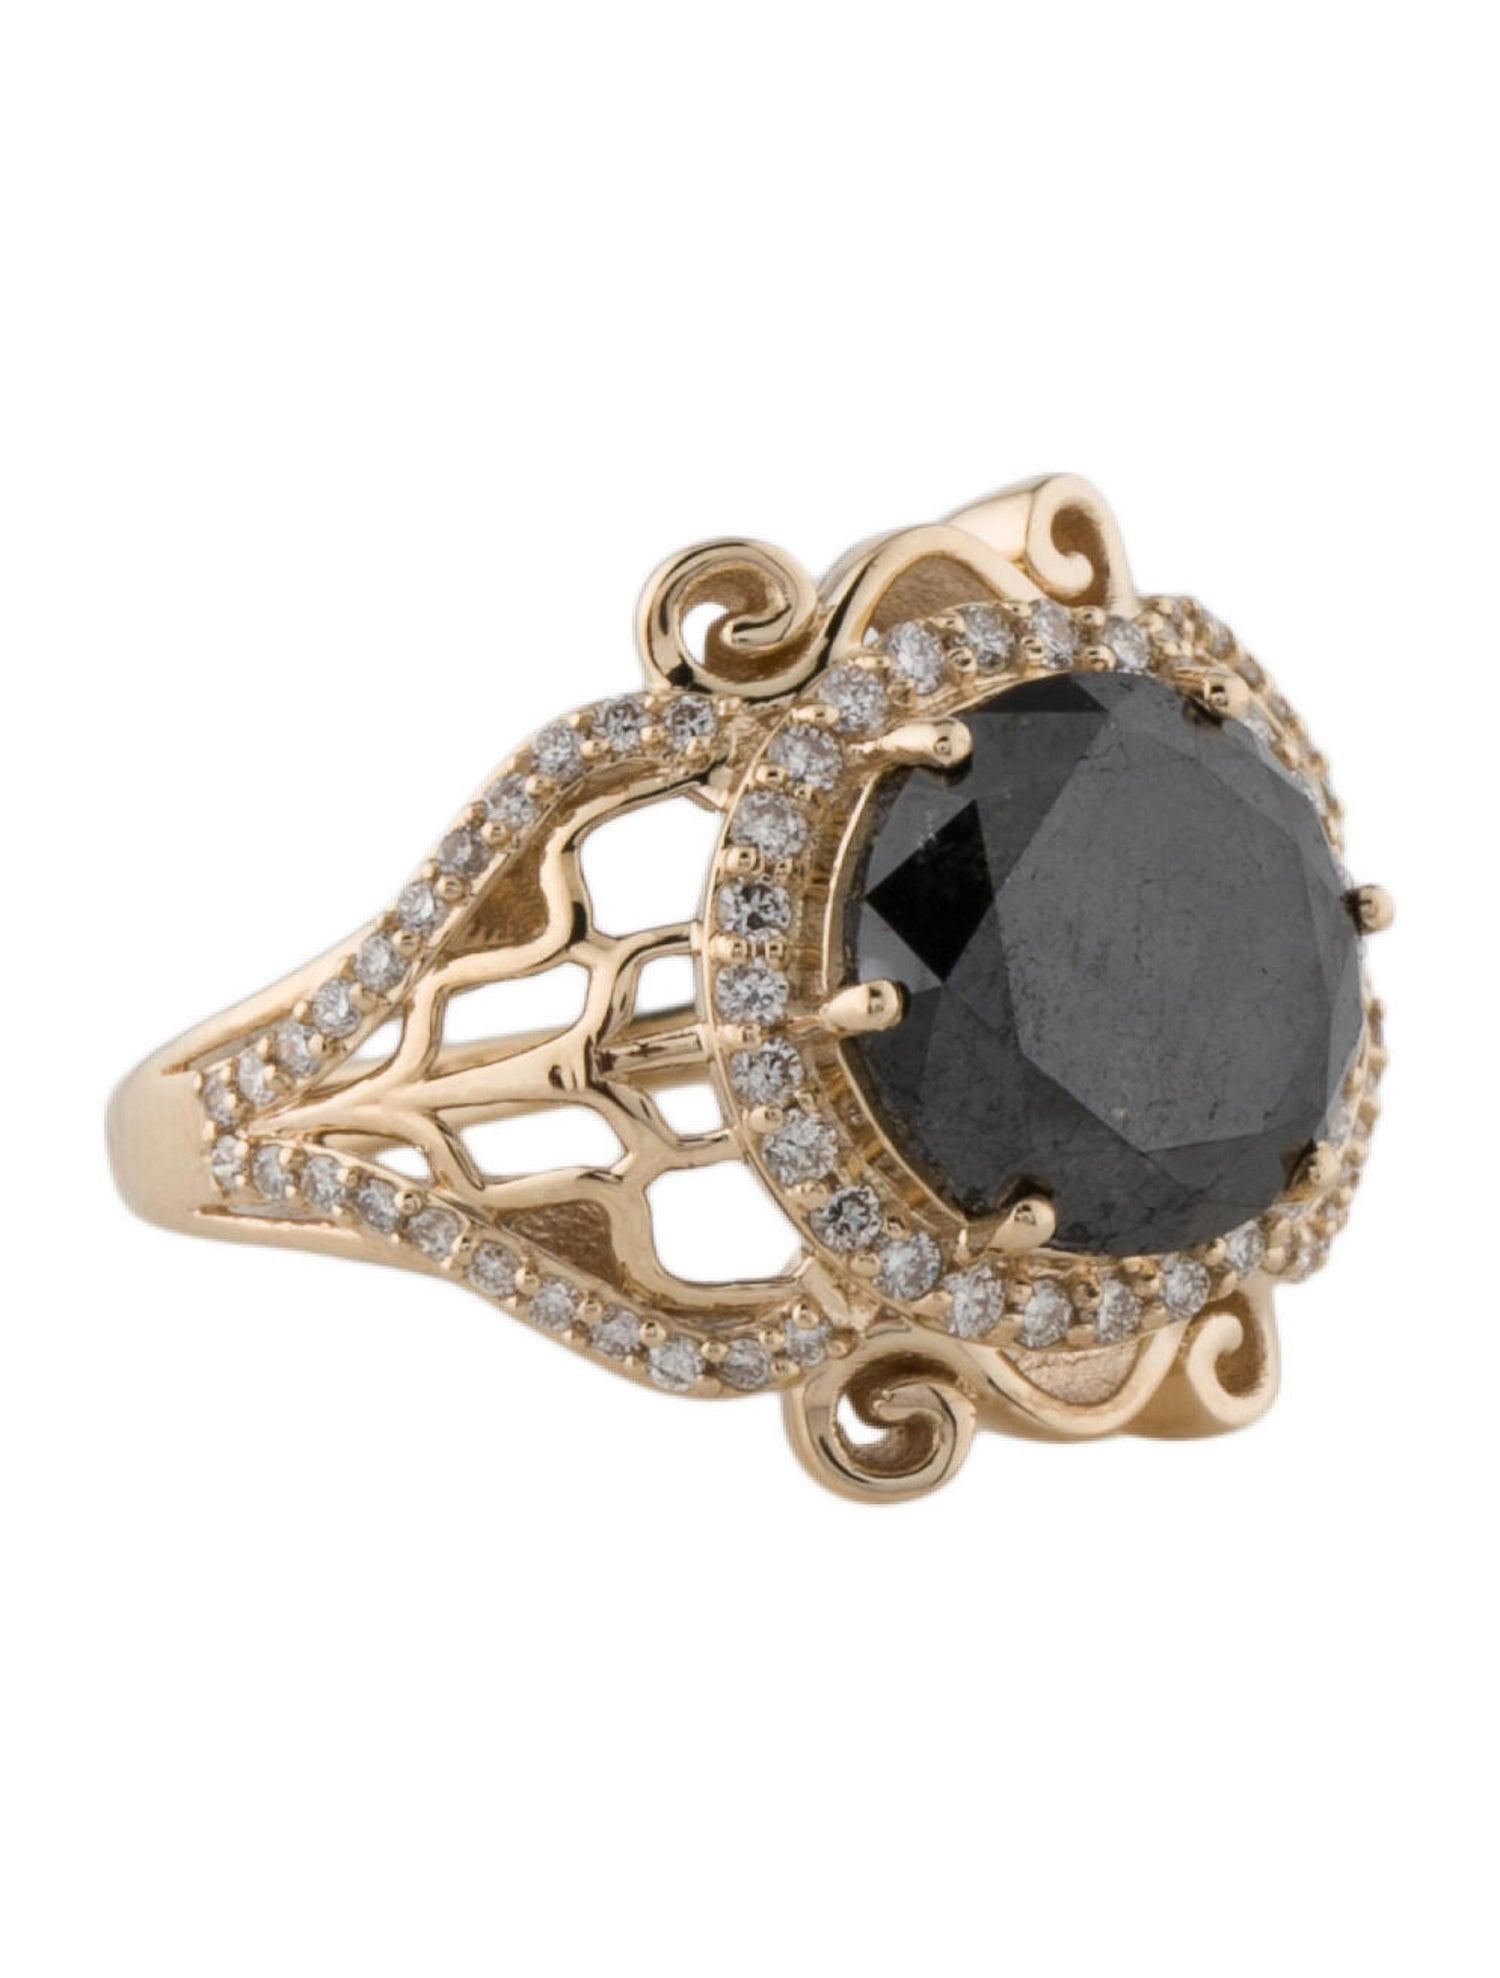 Ignite your style with the Magma Blaze Black Diamond and Diamond Ring from Jeweltique. This exquisite piece is a testament to the fiery energy of volcanic eruptions, captured in stunning black and white diamonds. Crafted in 14k yellow gold, the ring